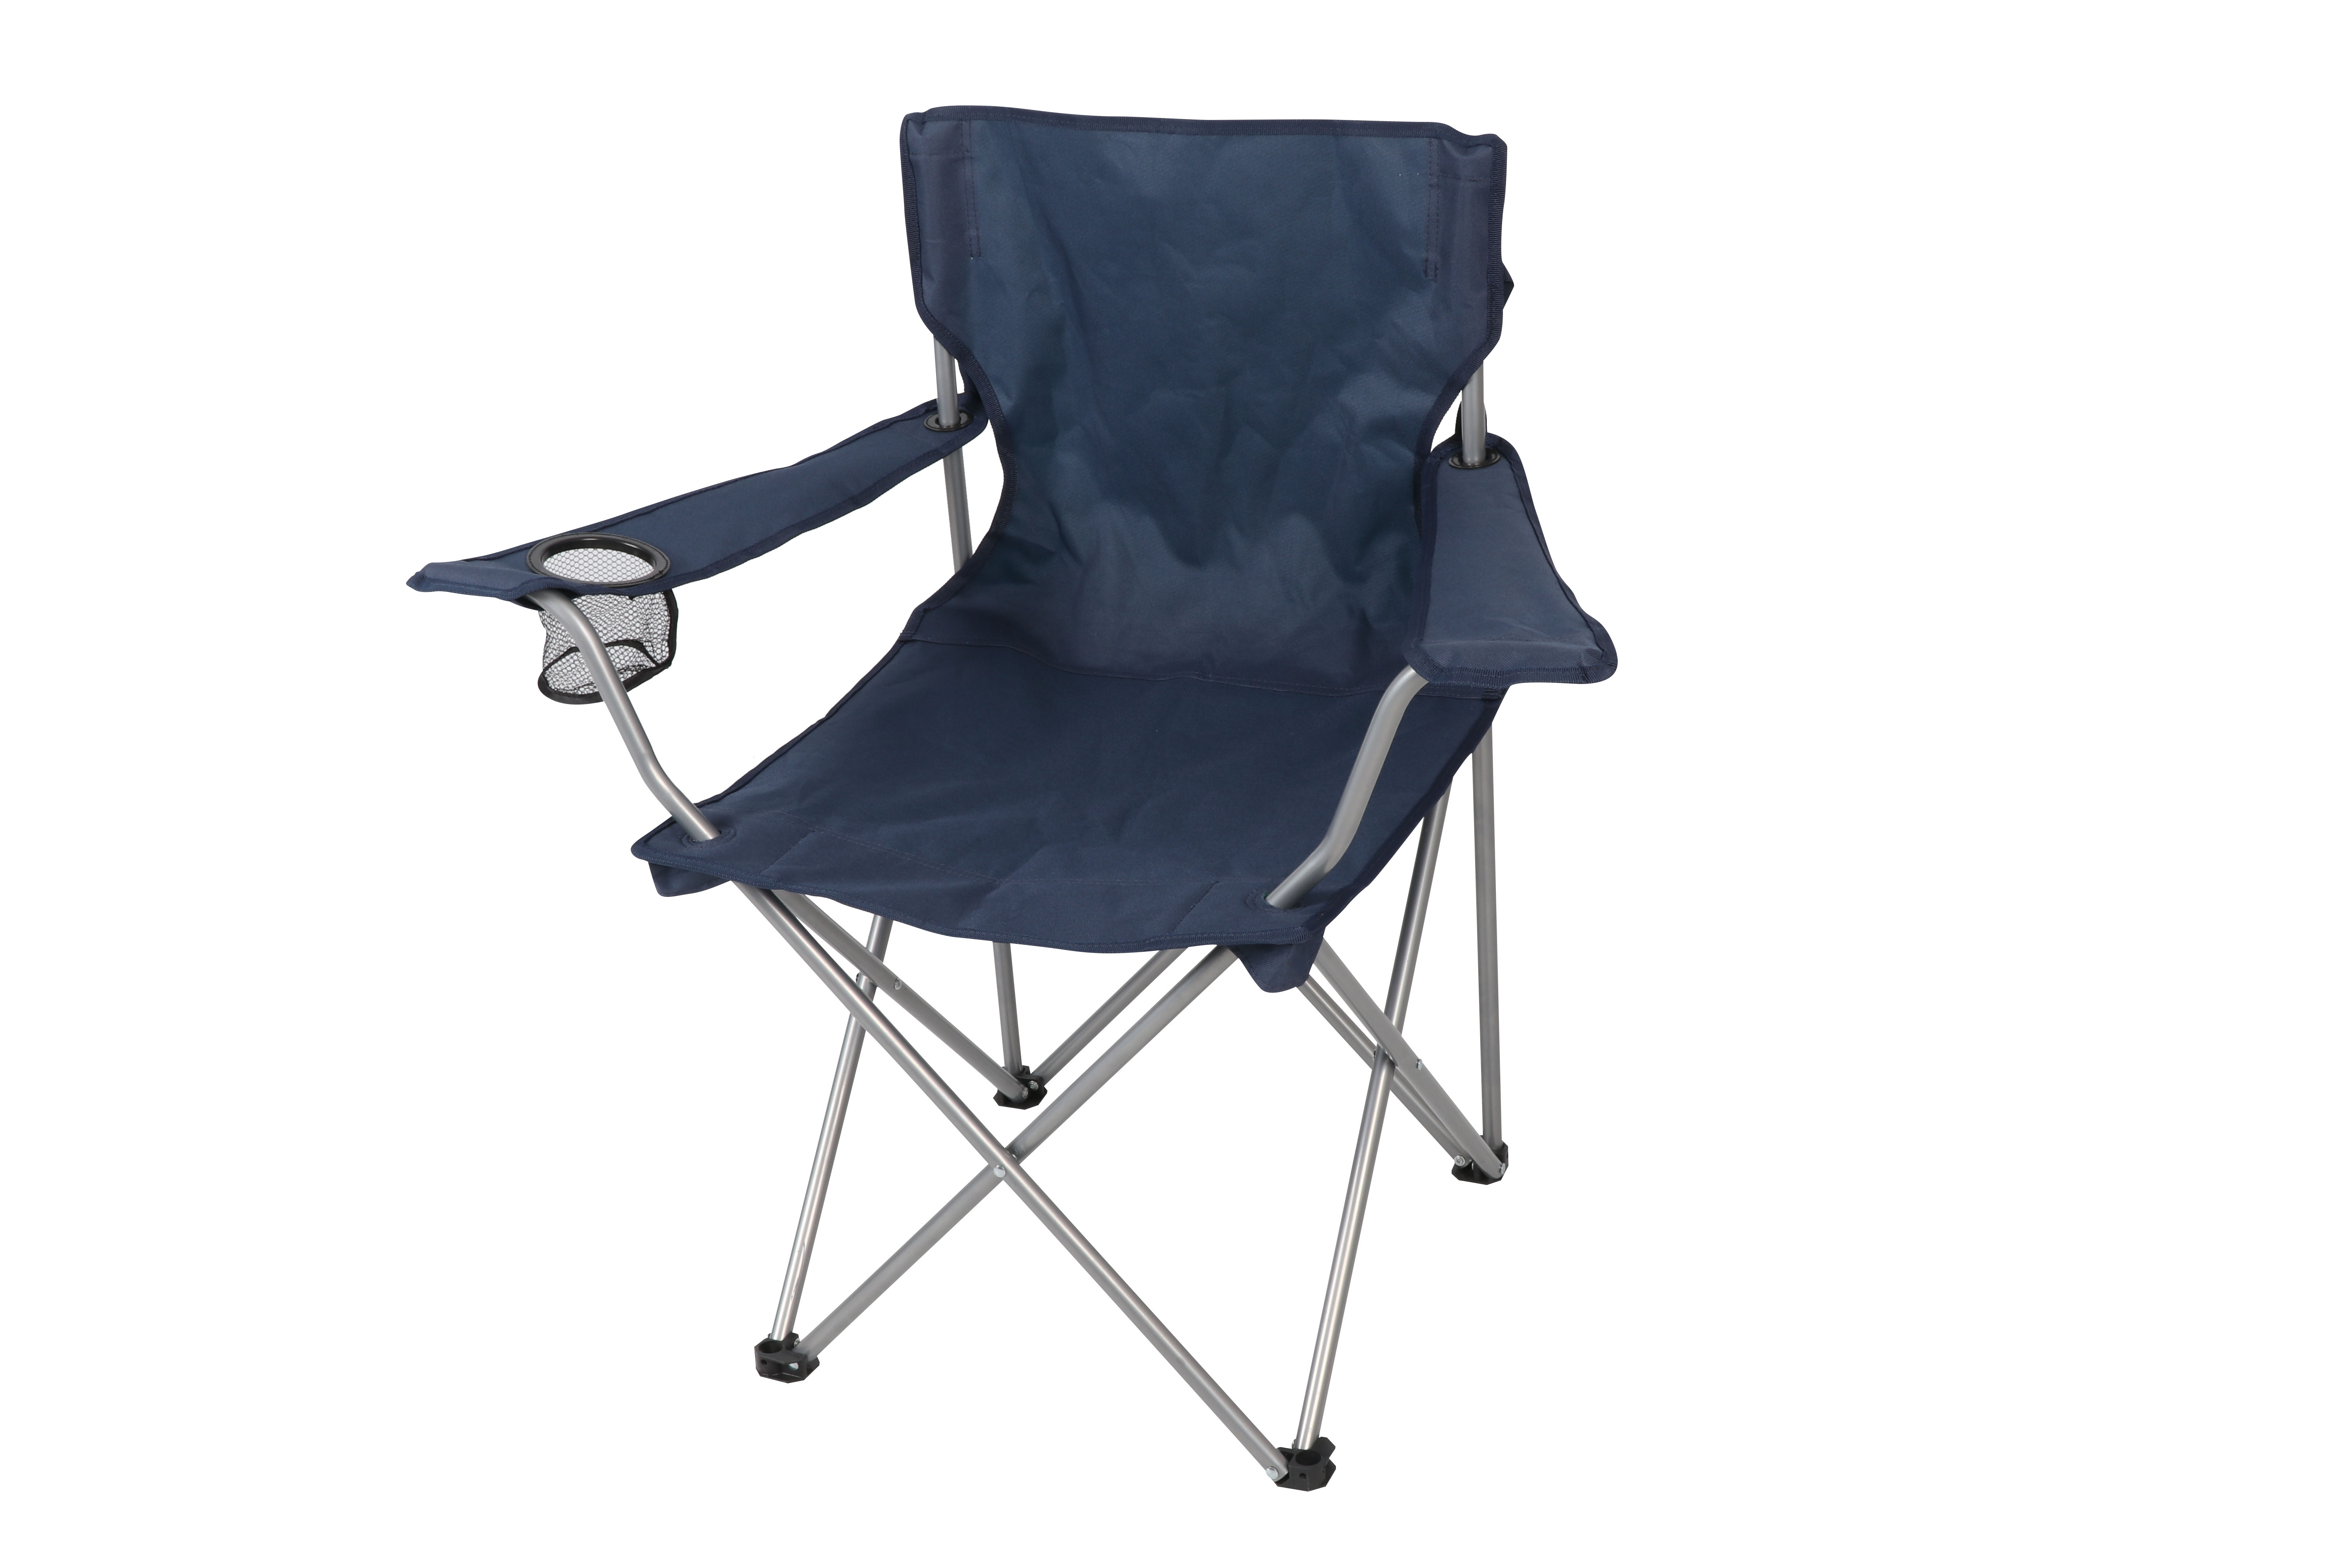 Ozark Trail Basic Quad Folding Camp Chair With Cup Holder, Blue, Adult - image 4 of 14